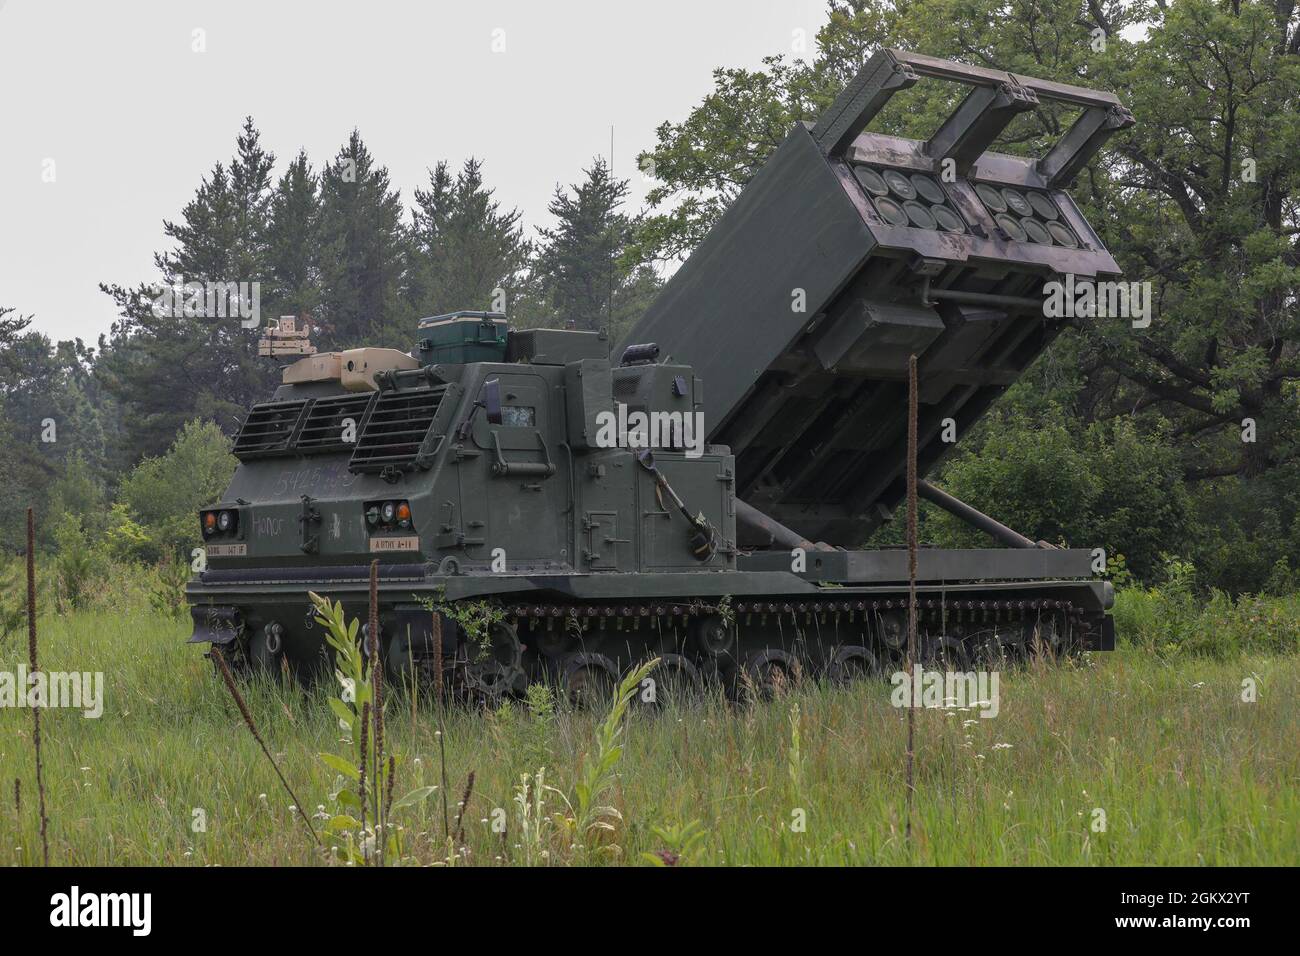 An M270A1 MLRS from the 1-147th FA, South Dakota National Guard, conducts a practice field reload during their annual training at Camp Ripley Training Center, Minnesota on July 15, 2021. The main mission of the 1-147th FA is to deliver precision fire on enemies both near or far and can hit targets up to 300 kilometers away. Stock Photo